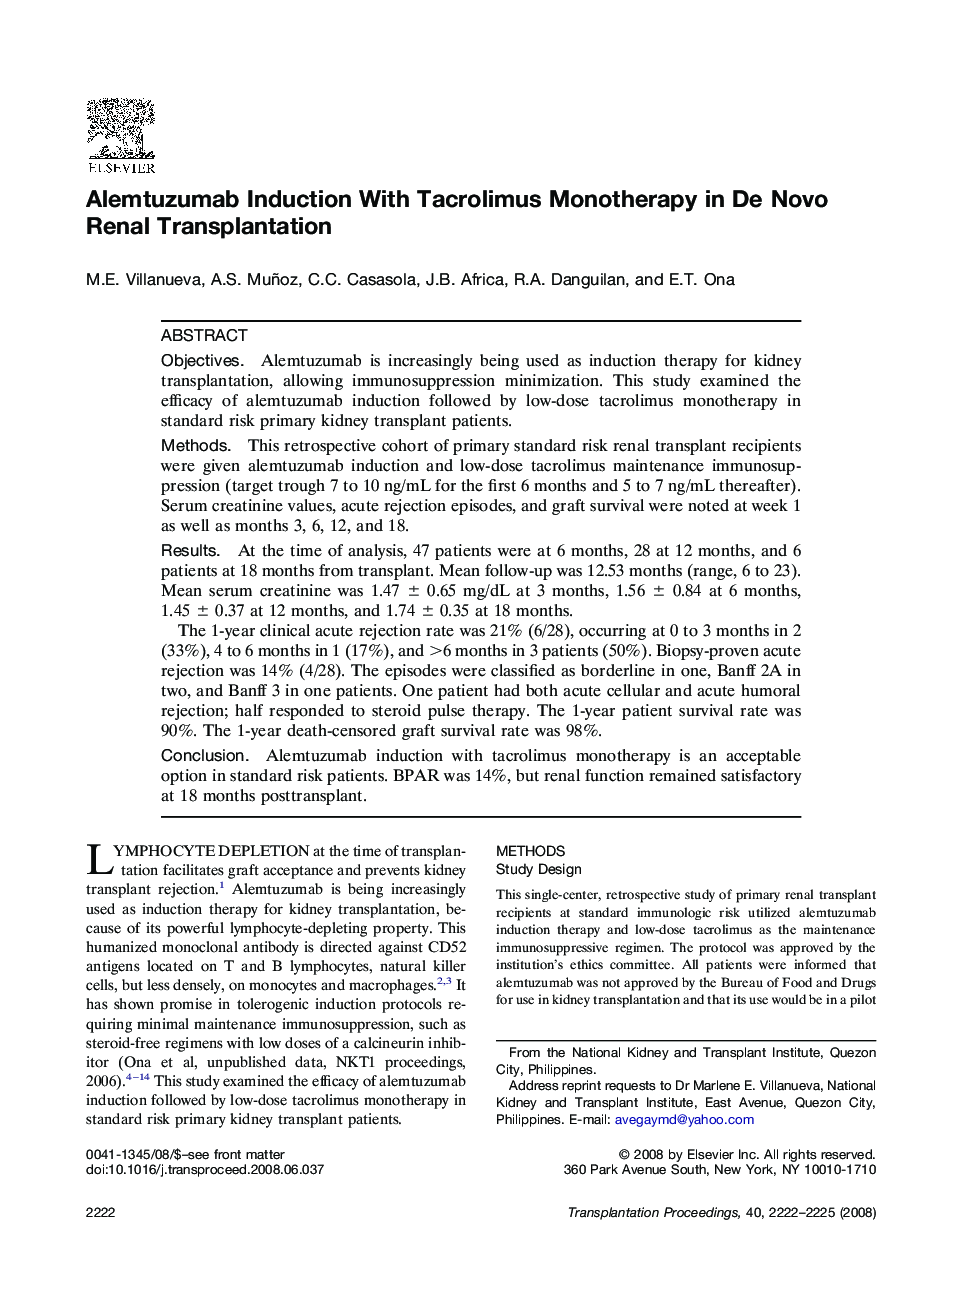 Alemtuzumab Induction With Tacrolimus Monotherapy in De Novo Renal Transplantation